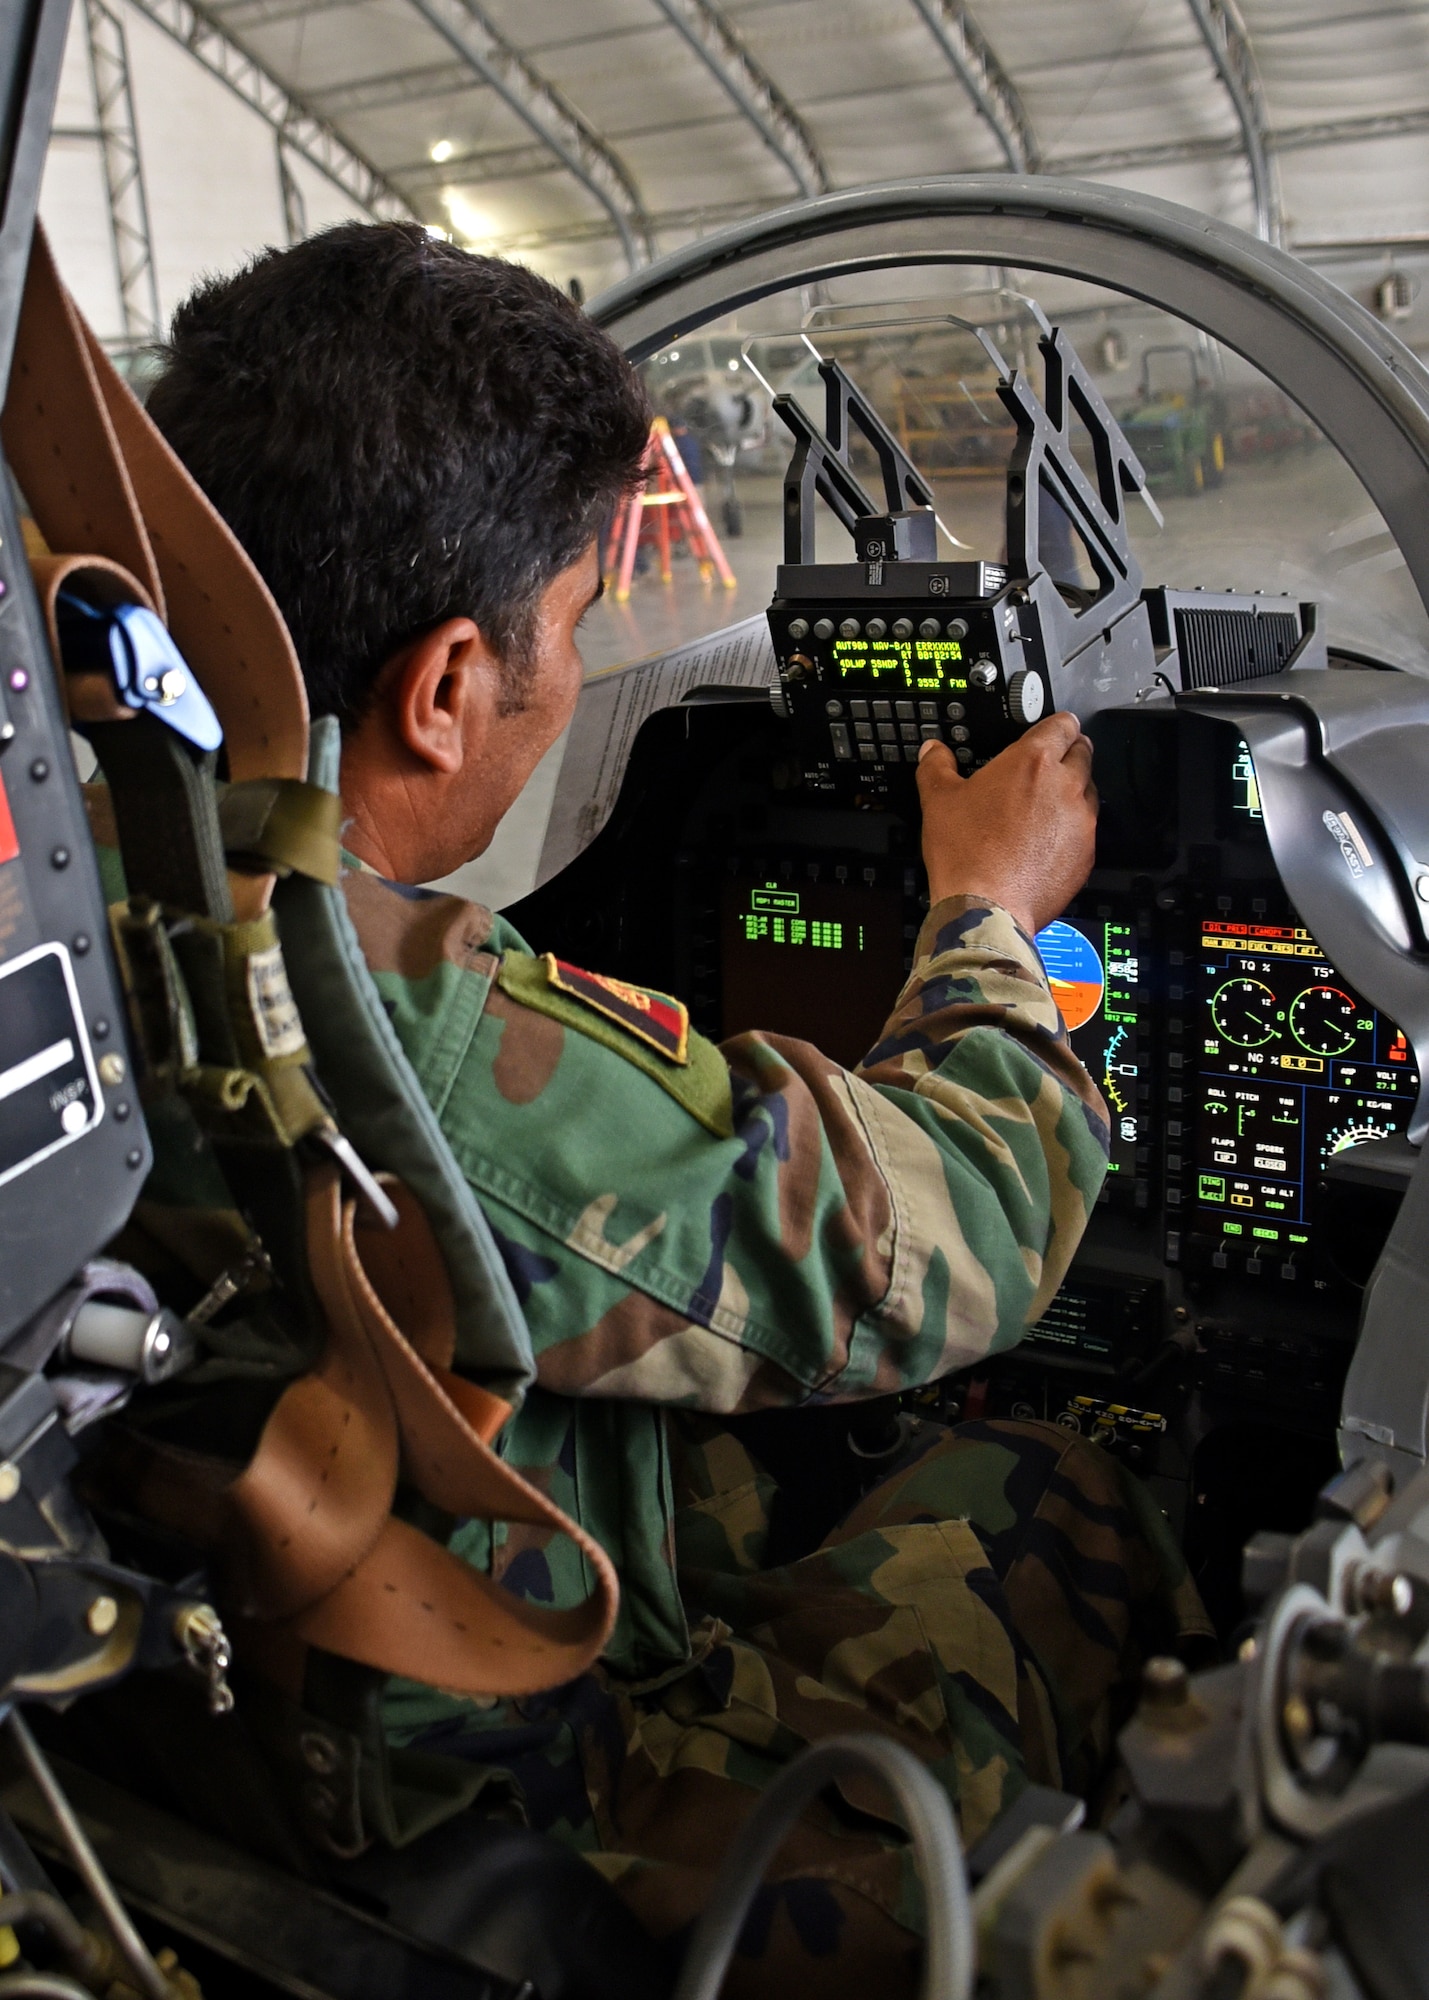 An Afghan Air Force A-29 Super Tucano maintainer performs an avionics check in the cockpit of the aircraft at Kabul Air Wing, Afghanistan, July 26, 2017. Recently, AAF A-29 maintenance leadership requested to take full responsibility for flight line maintenance operations from Train, Advise, Assist Command-Air advisors and contract maintenance. This initiative by the maintainers is another step closer to the AAF becoming a professional, capable and sustainable force. (U.S. Air Force photo by Tech. Sgt. Veronica Pierce)